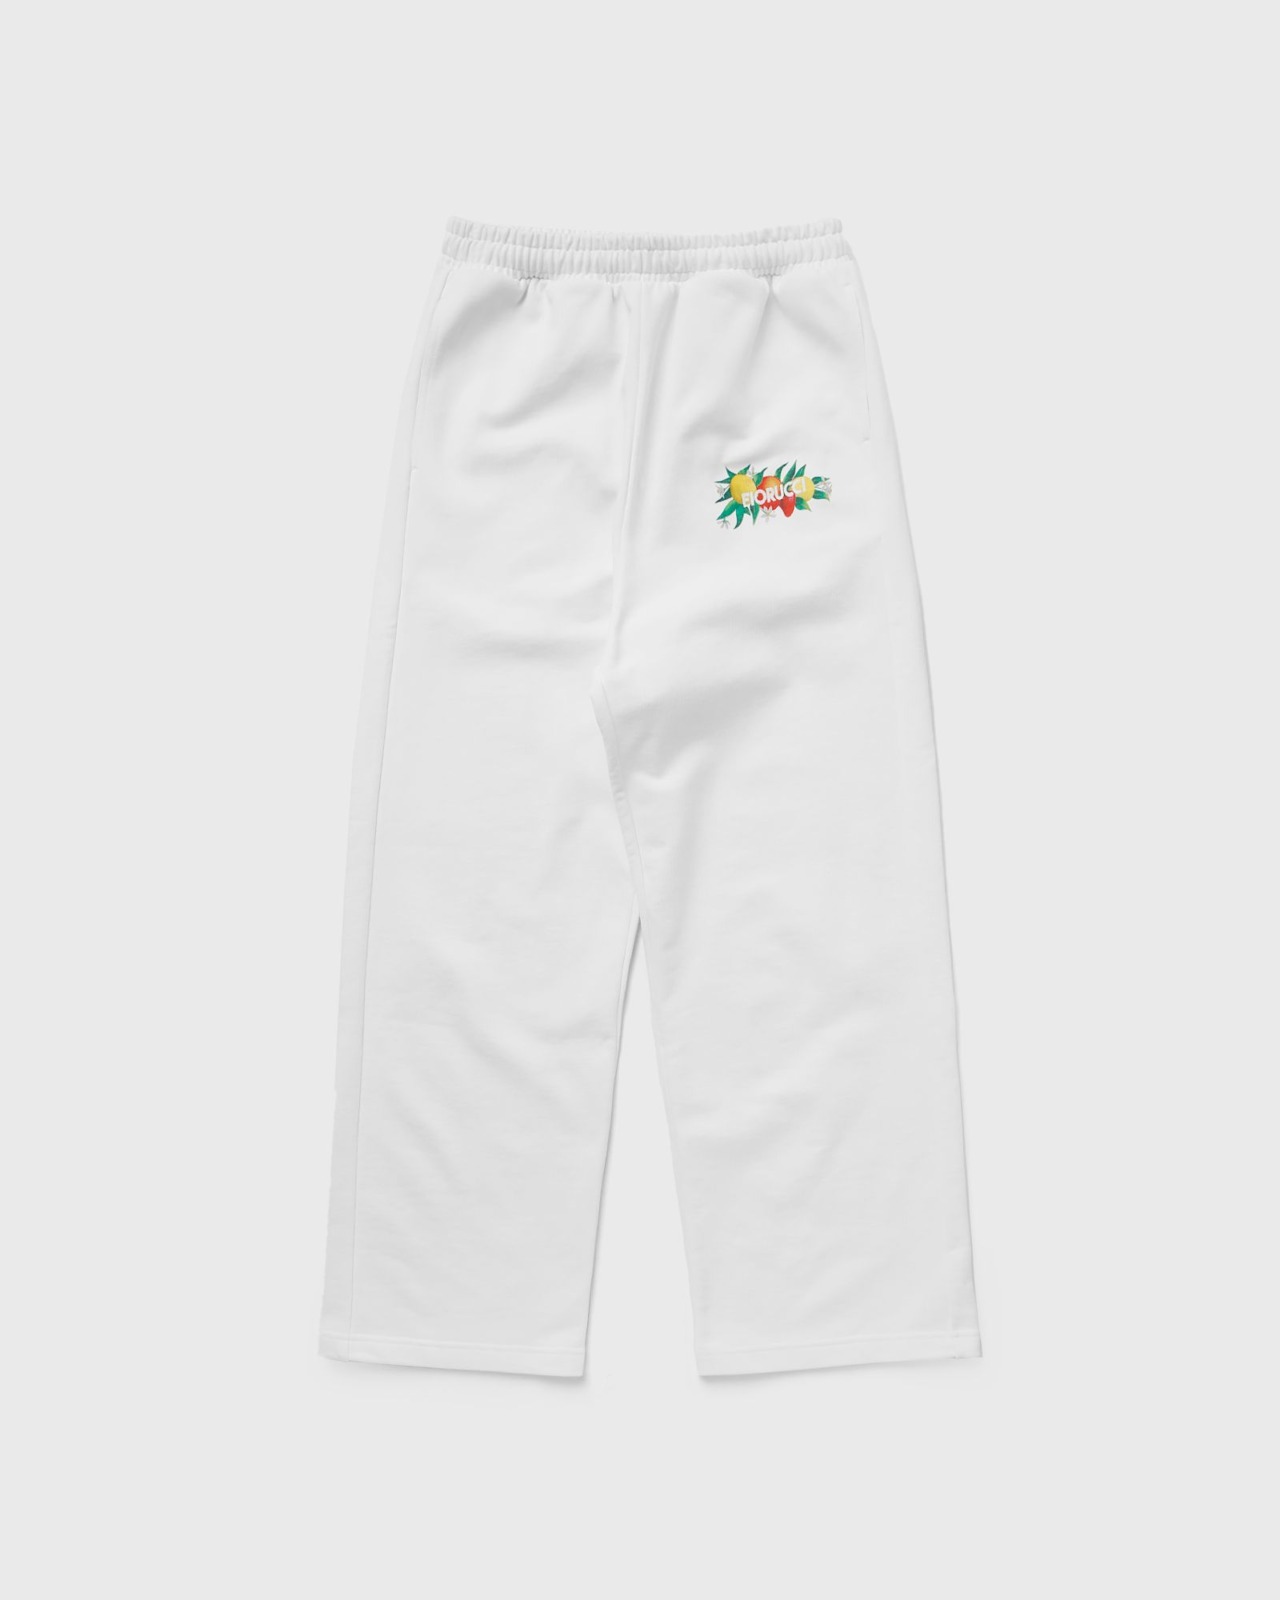 Fiorucci - Lady Joggers in White by Bstn GOOFASH